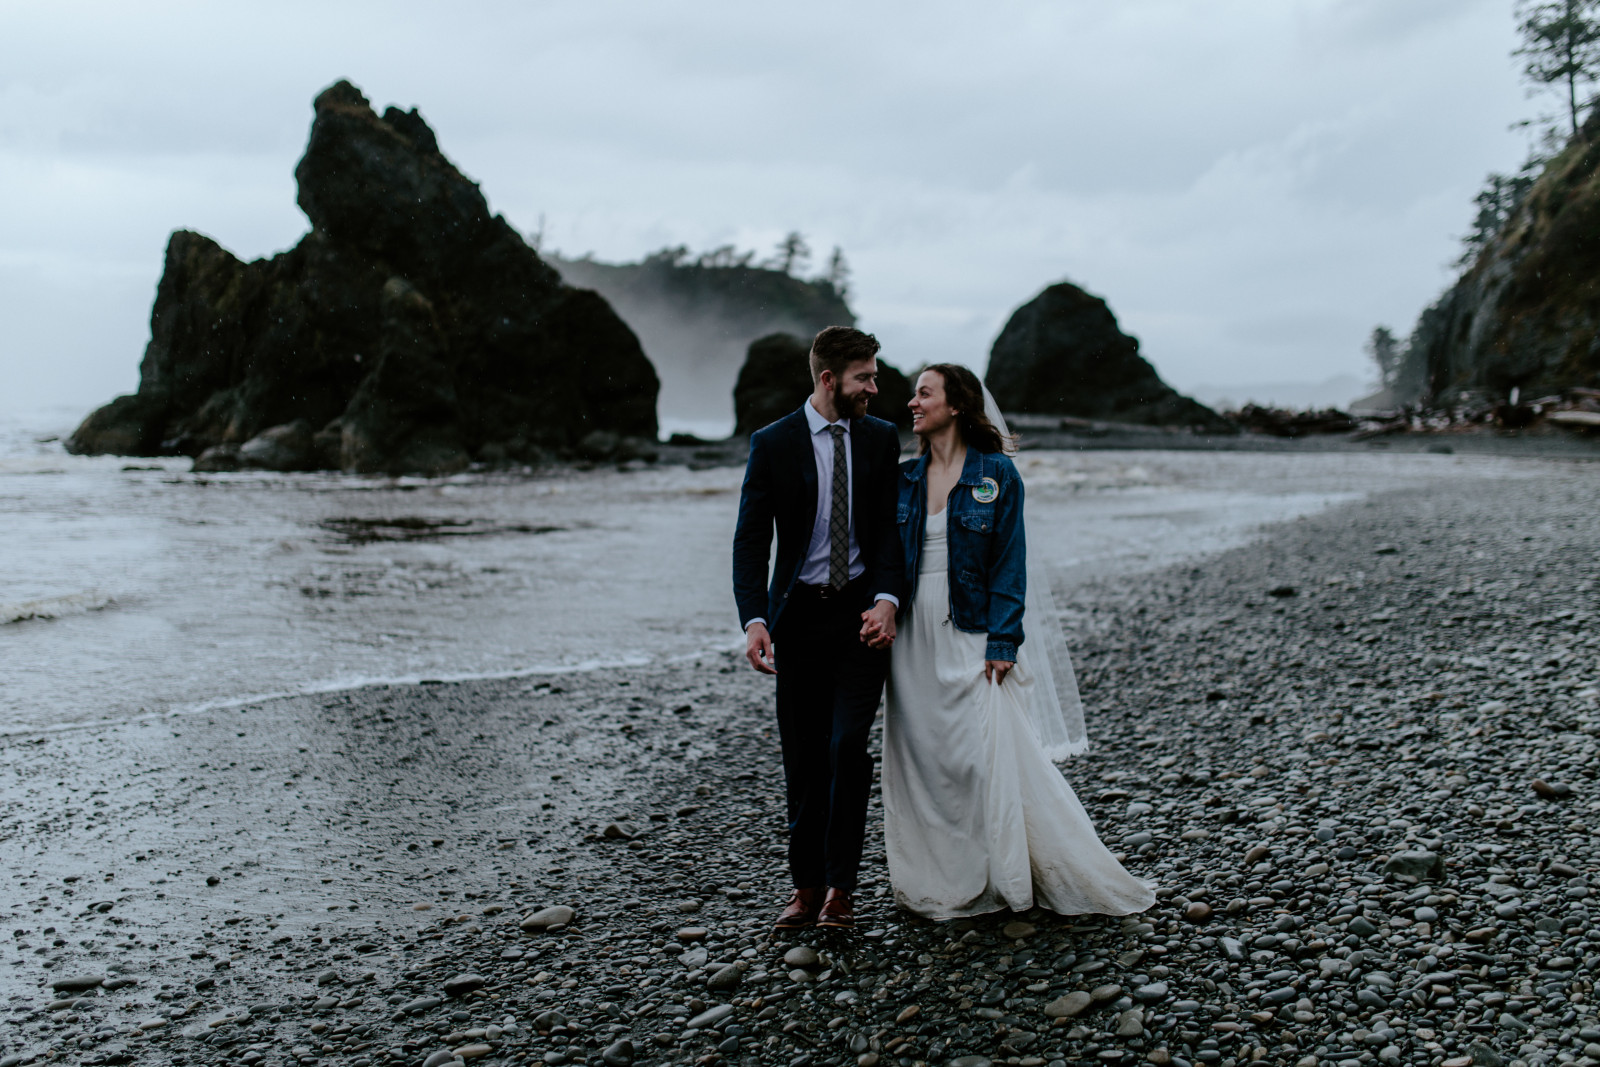 Mollie and Corey look at each other as they walk. Elopement photography at Olympic National Park by Sienna Plus Josh.